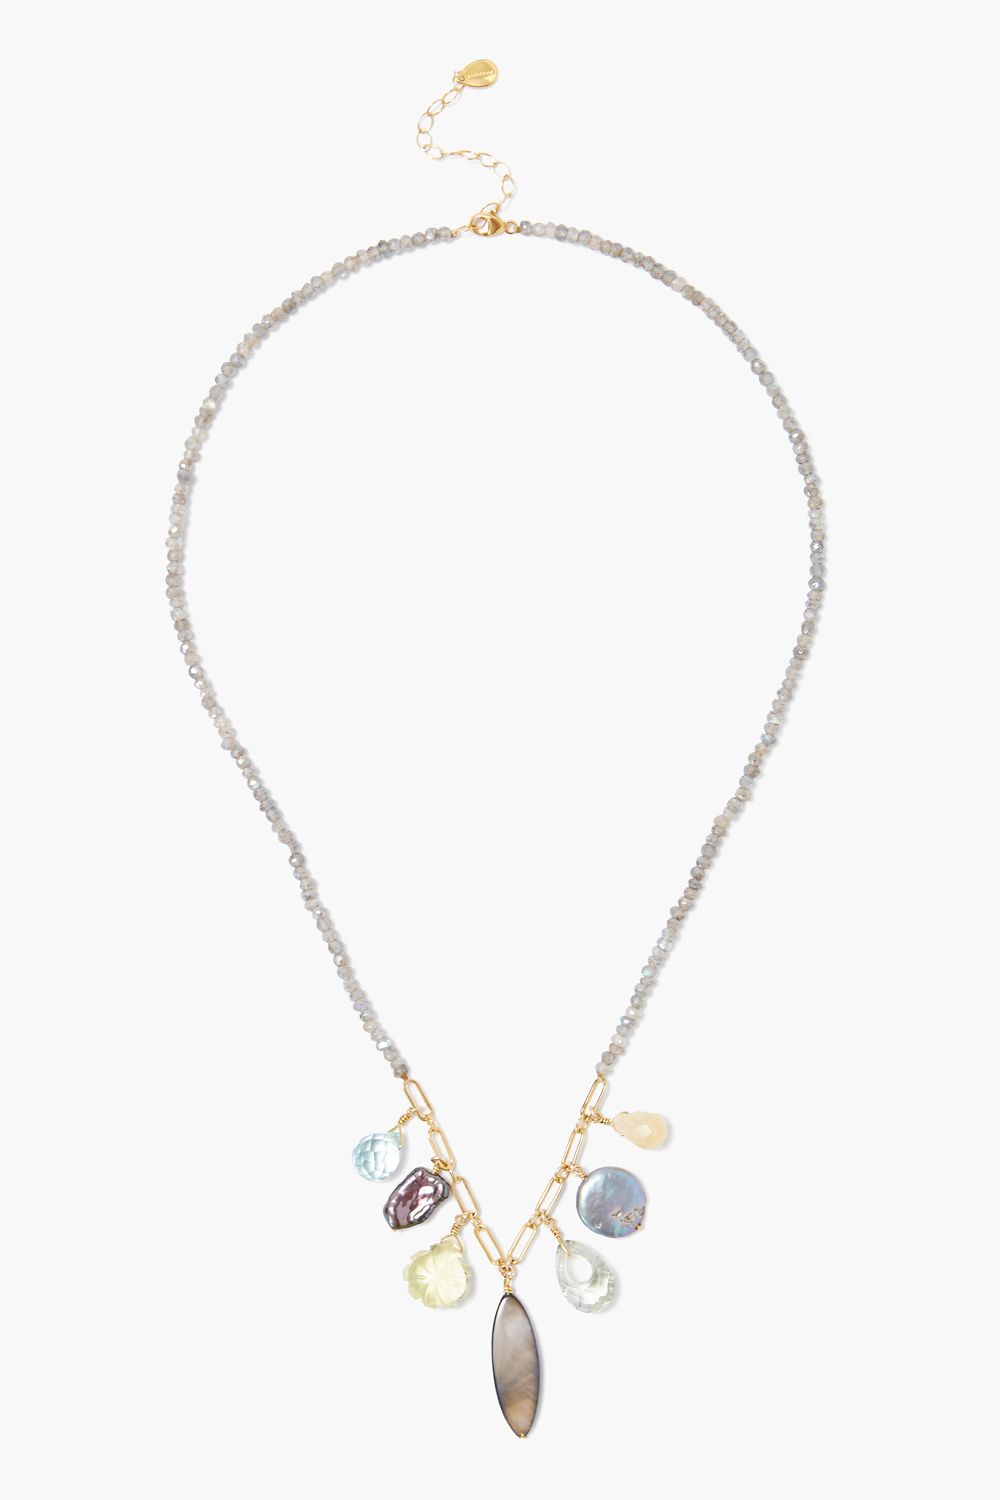 MYSTIC LABRADORITE MIX SUSPENDED STONE NECKLACE - Kingfisher Road - Online Boutique